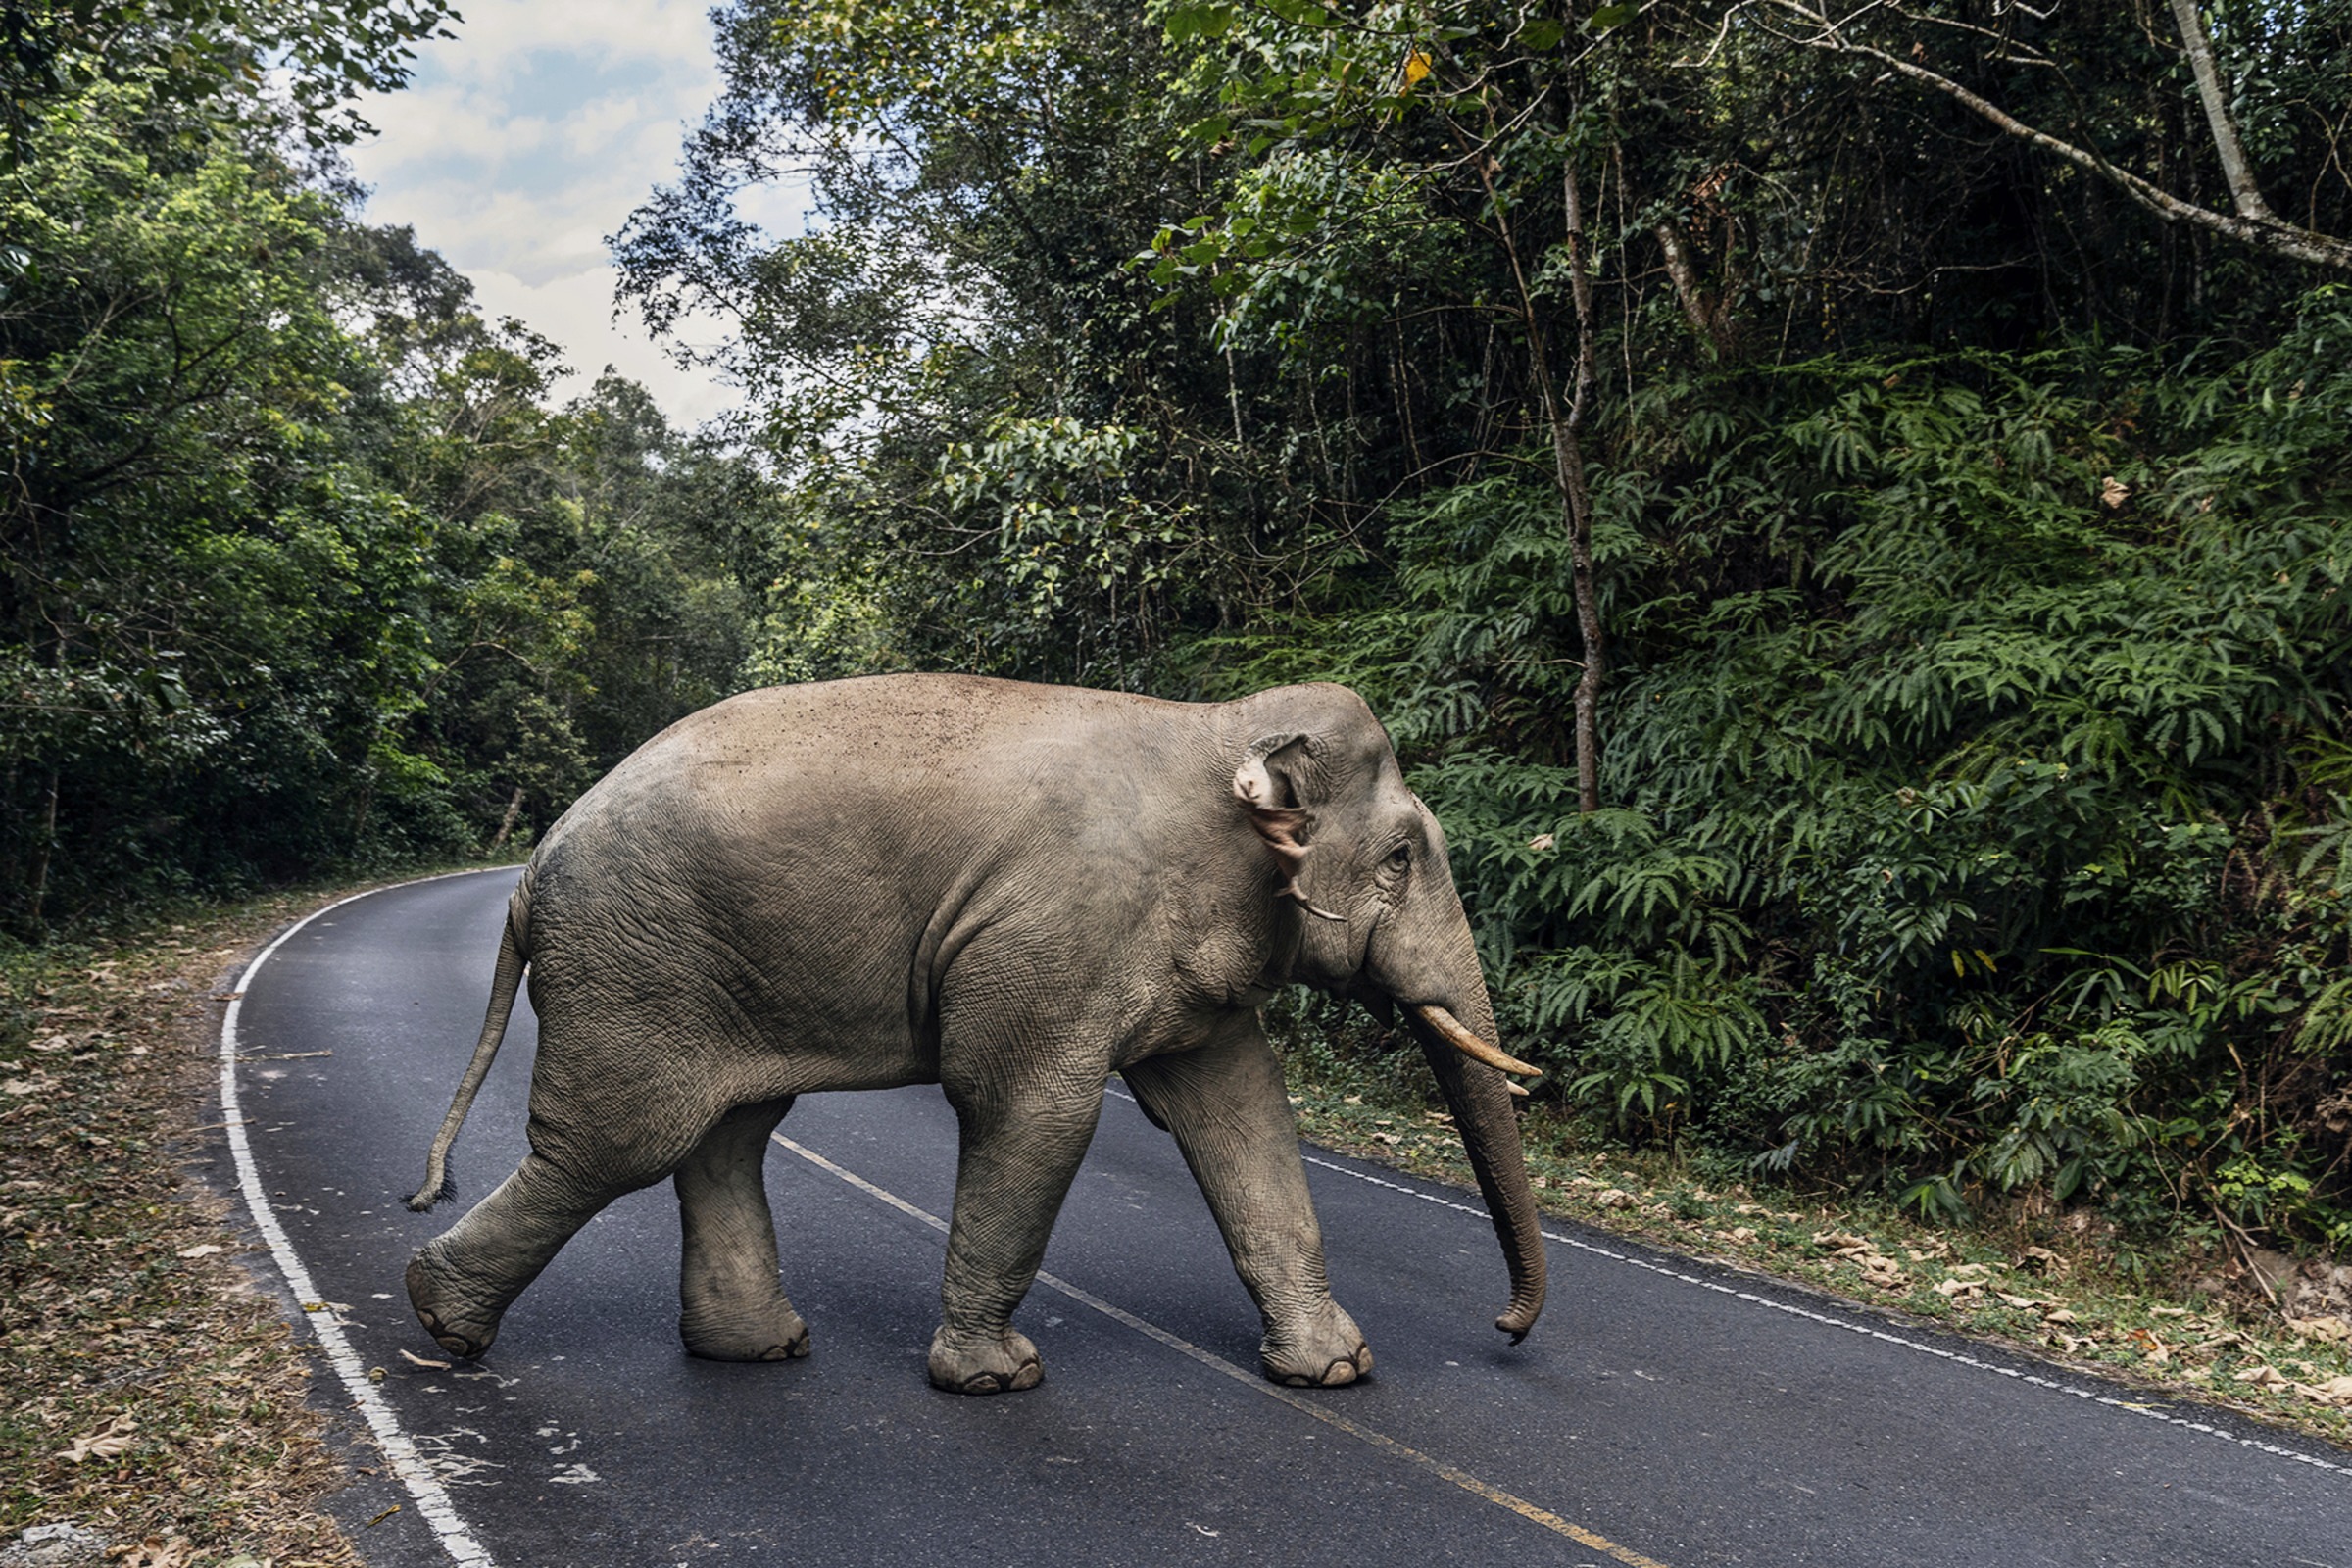 A wild elephant on the road in Khao Yai National Park, Thailand, Nov. 22, 2019. Tourist trails helped push elephants to their deaths in Thailand's oldest nature preserve, but the coronavirus lockdown is allowing them to roam freely again. (Adam Dean—The New York Times/Redux)